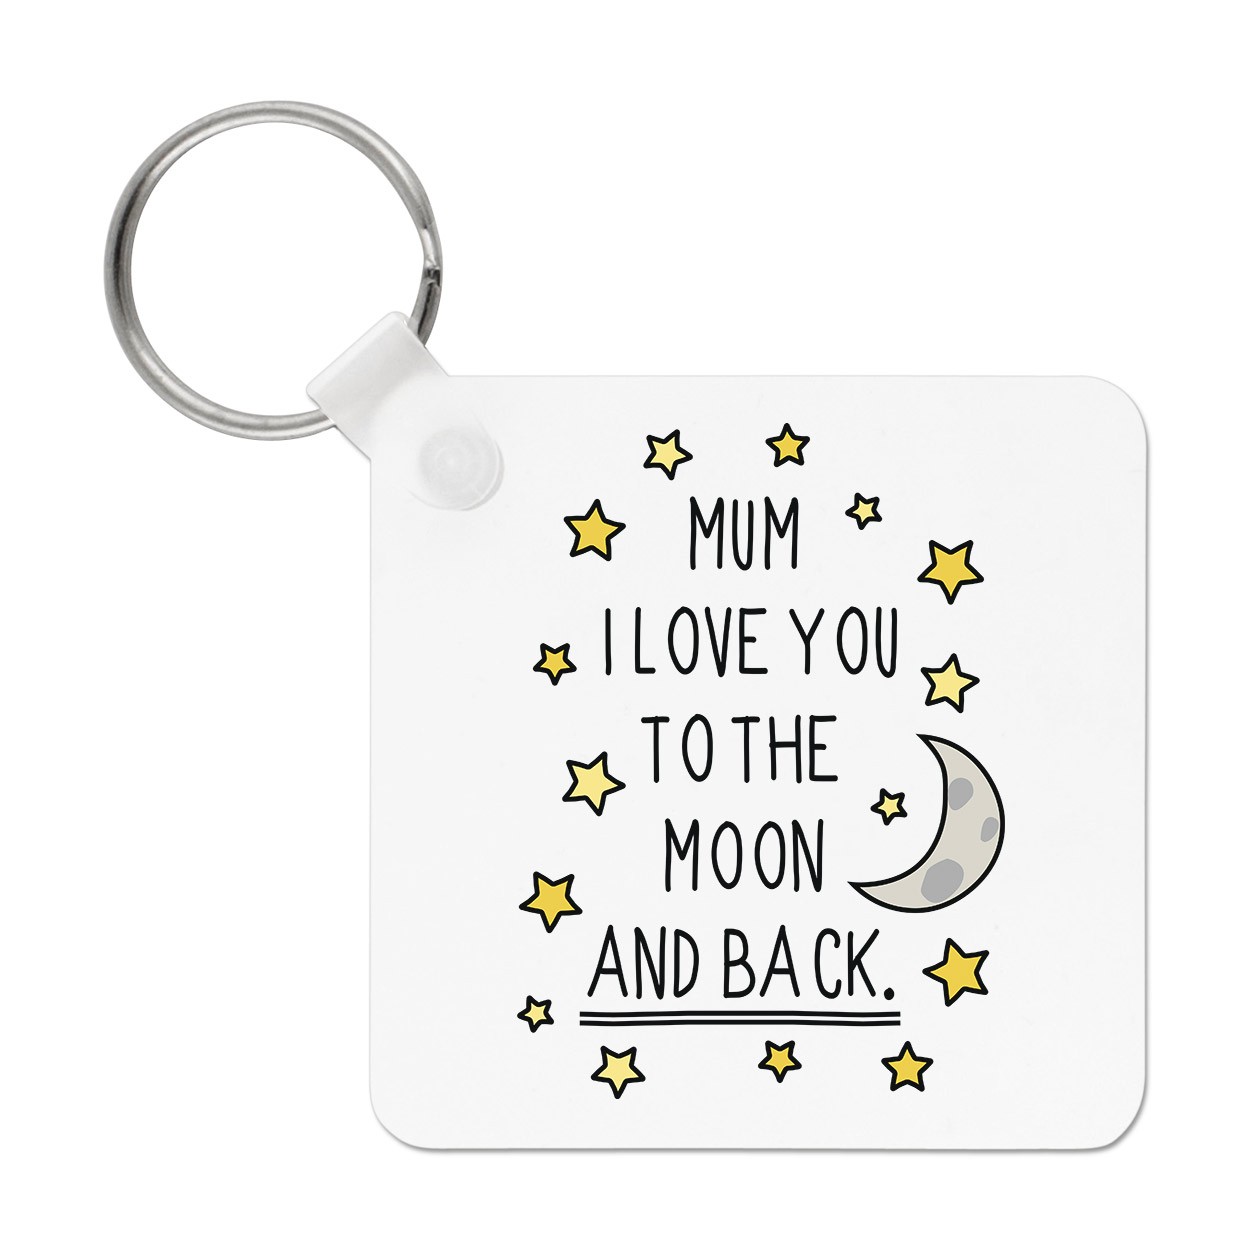 Mum I Love You To The Moon And Back Keyring Key Chain